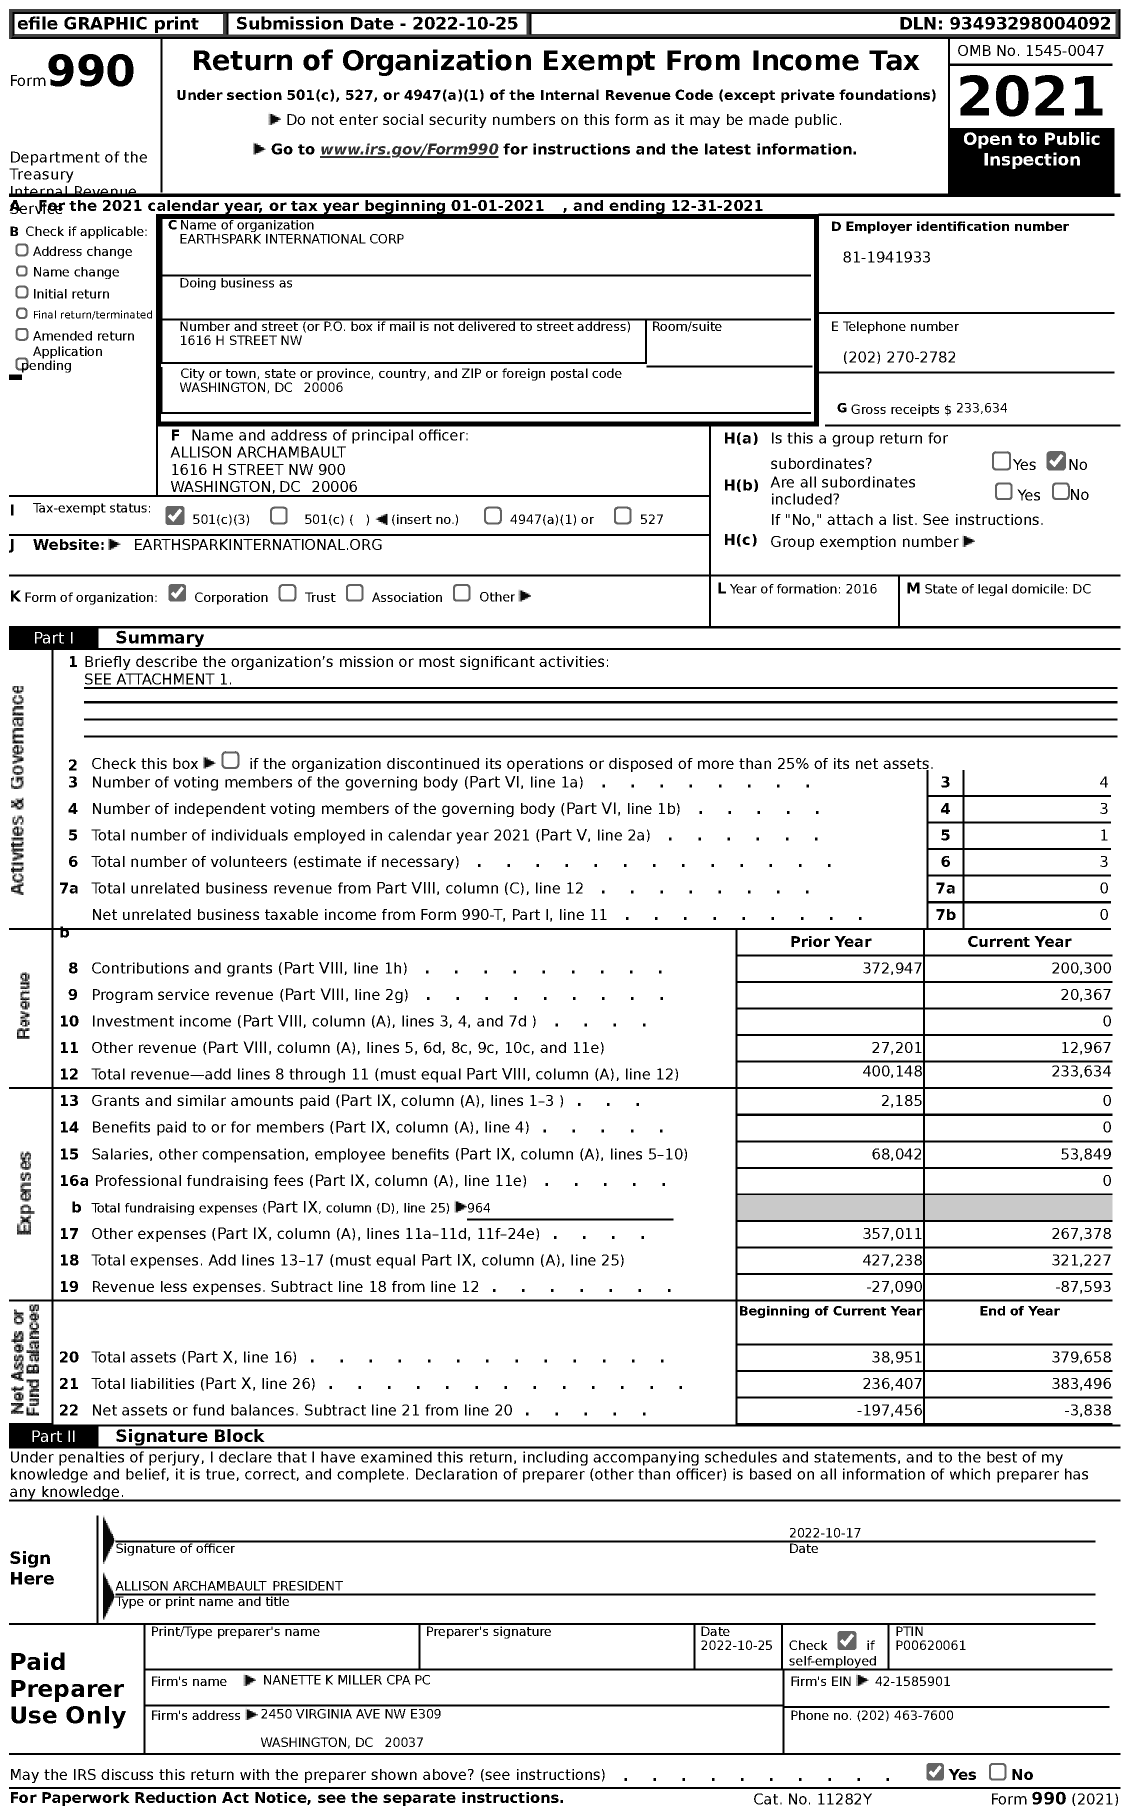 Image of first page of 2021 Form 990 for Earthspark International Corporation